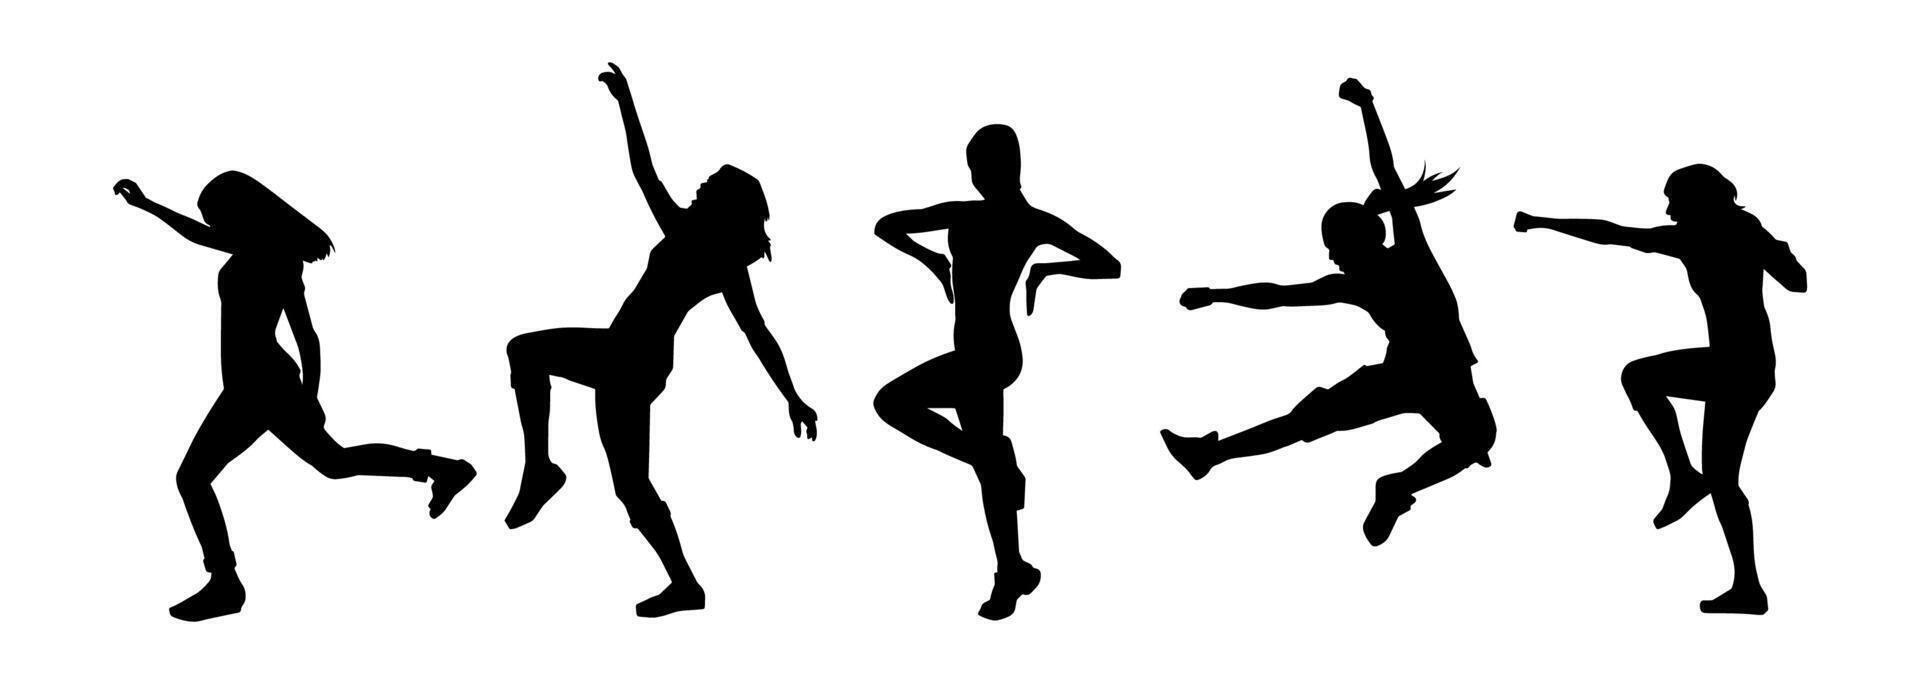 Silhouette collection of slim female dancers in action pose vector